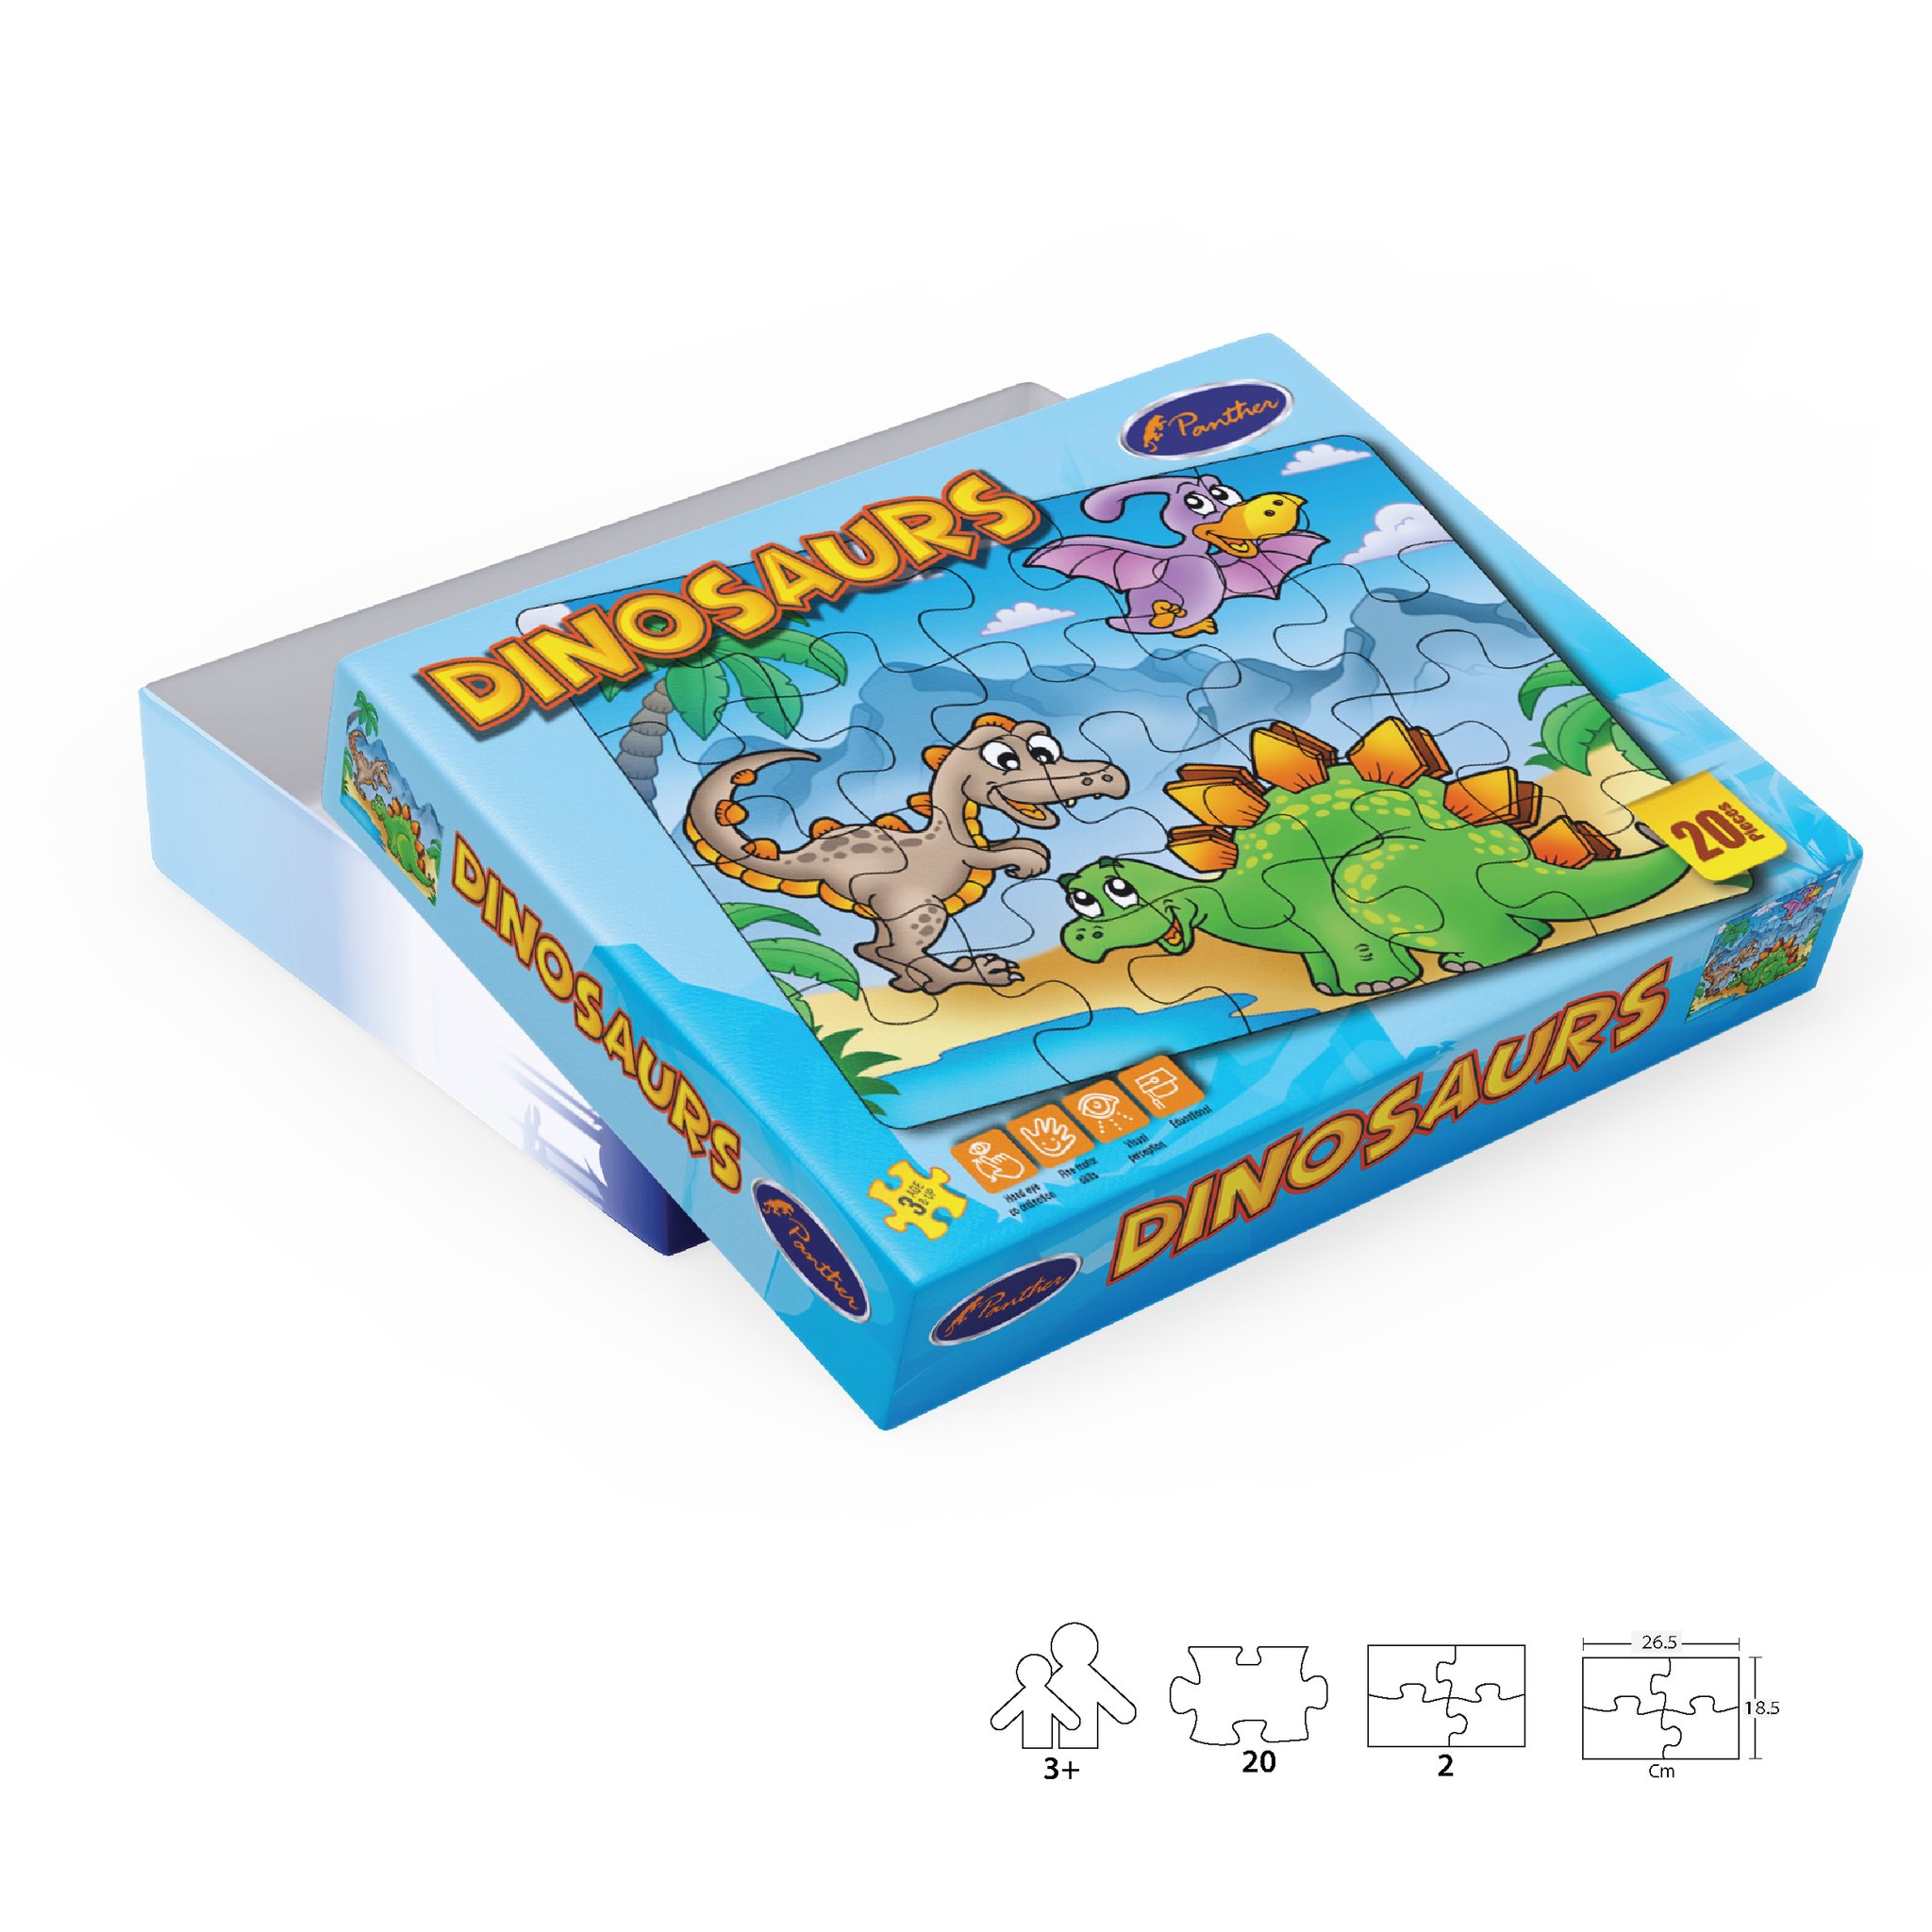 Panther Dinosaurs Puzzle Age 3 +